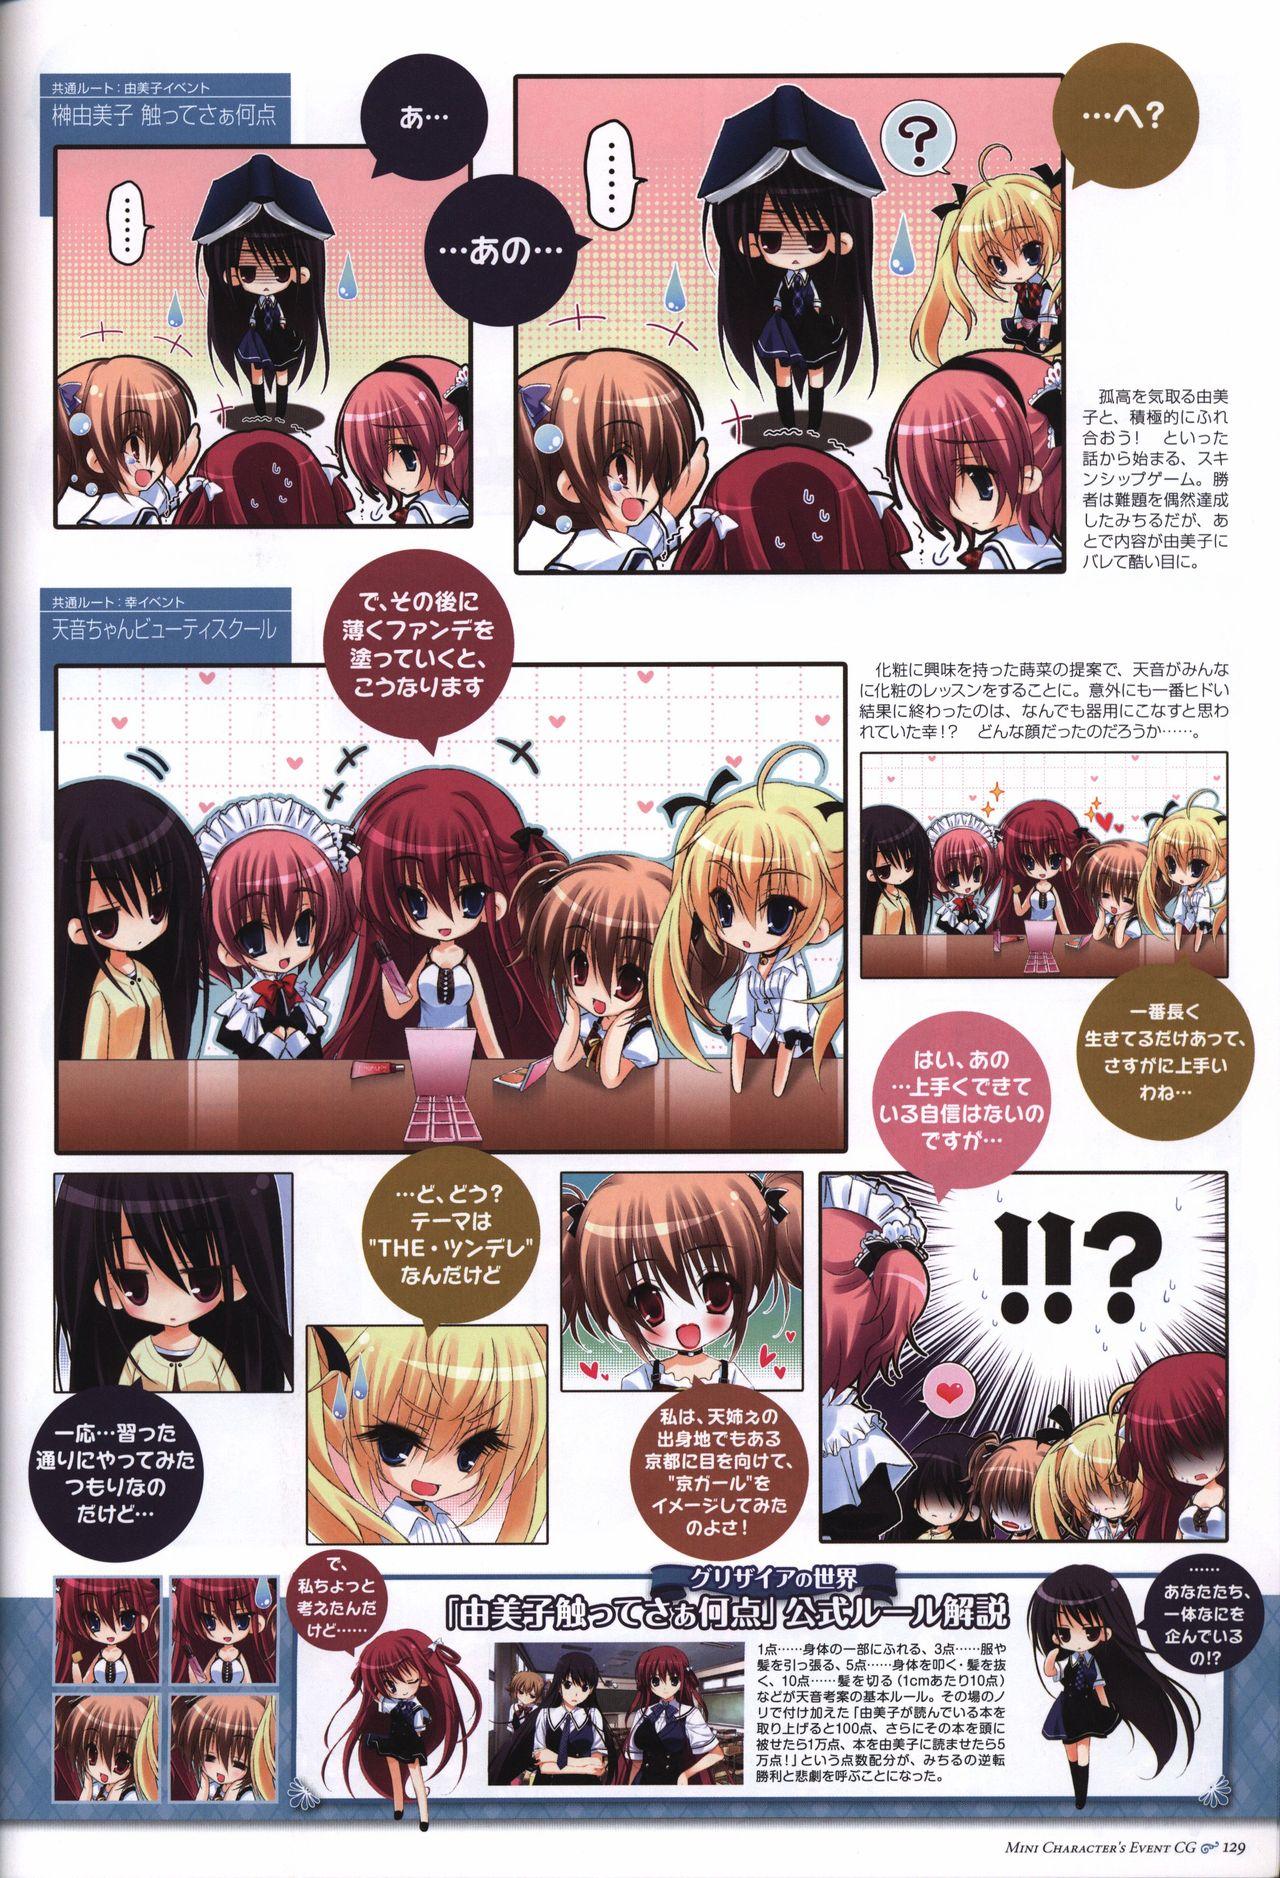 The Fruit of Grisaia Visual FanBook 129